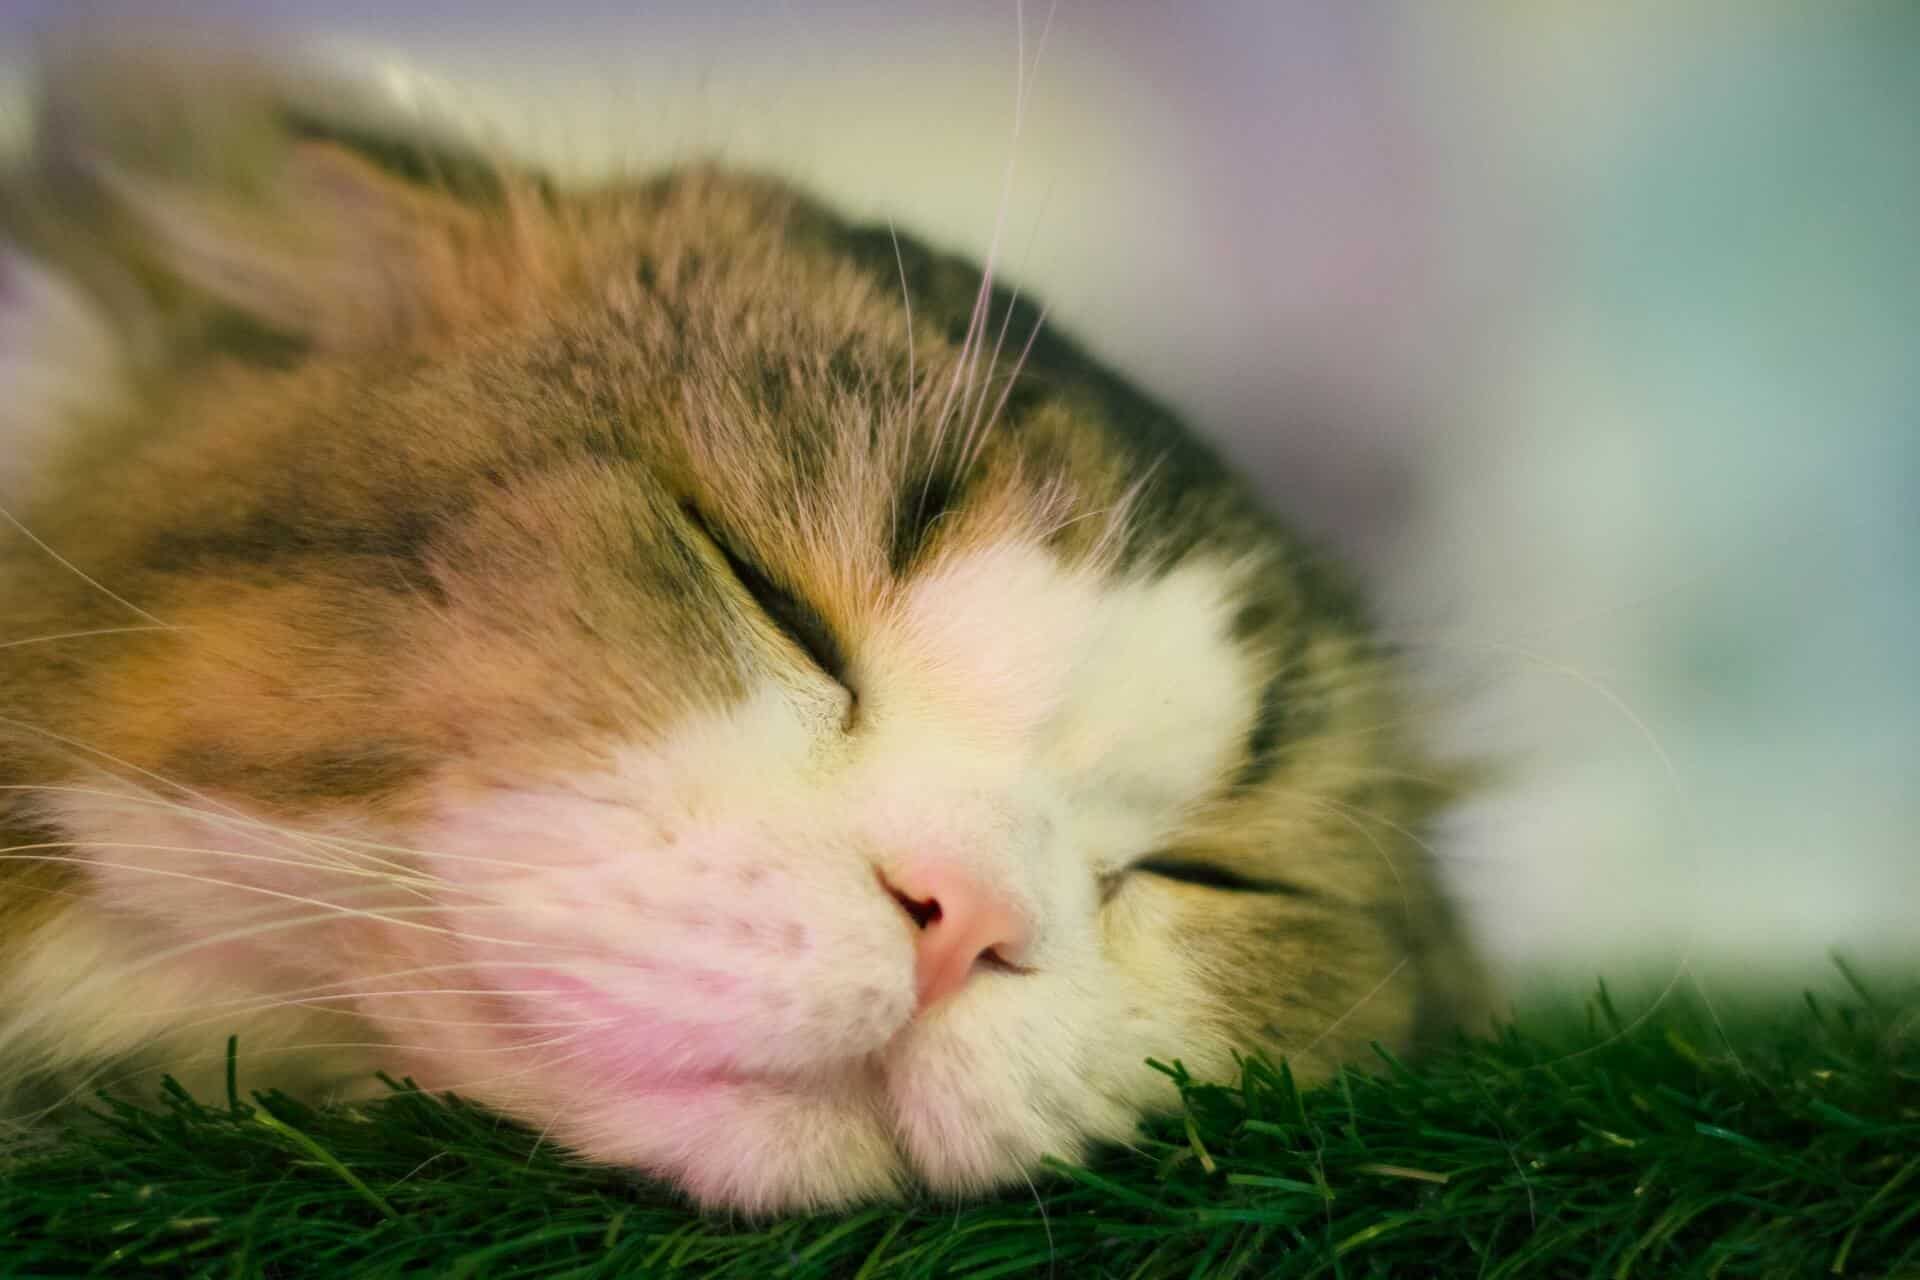 chill date ideas singapore - a cat is sleeping peacefully in a cat cafe